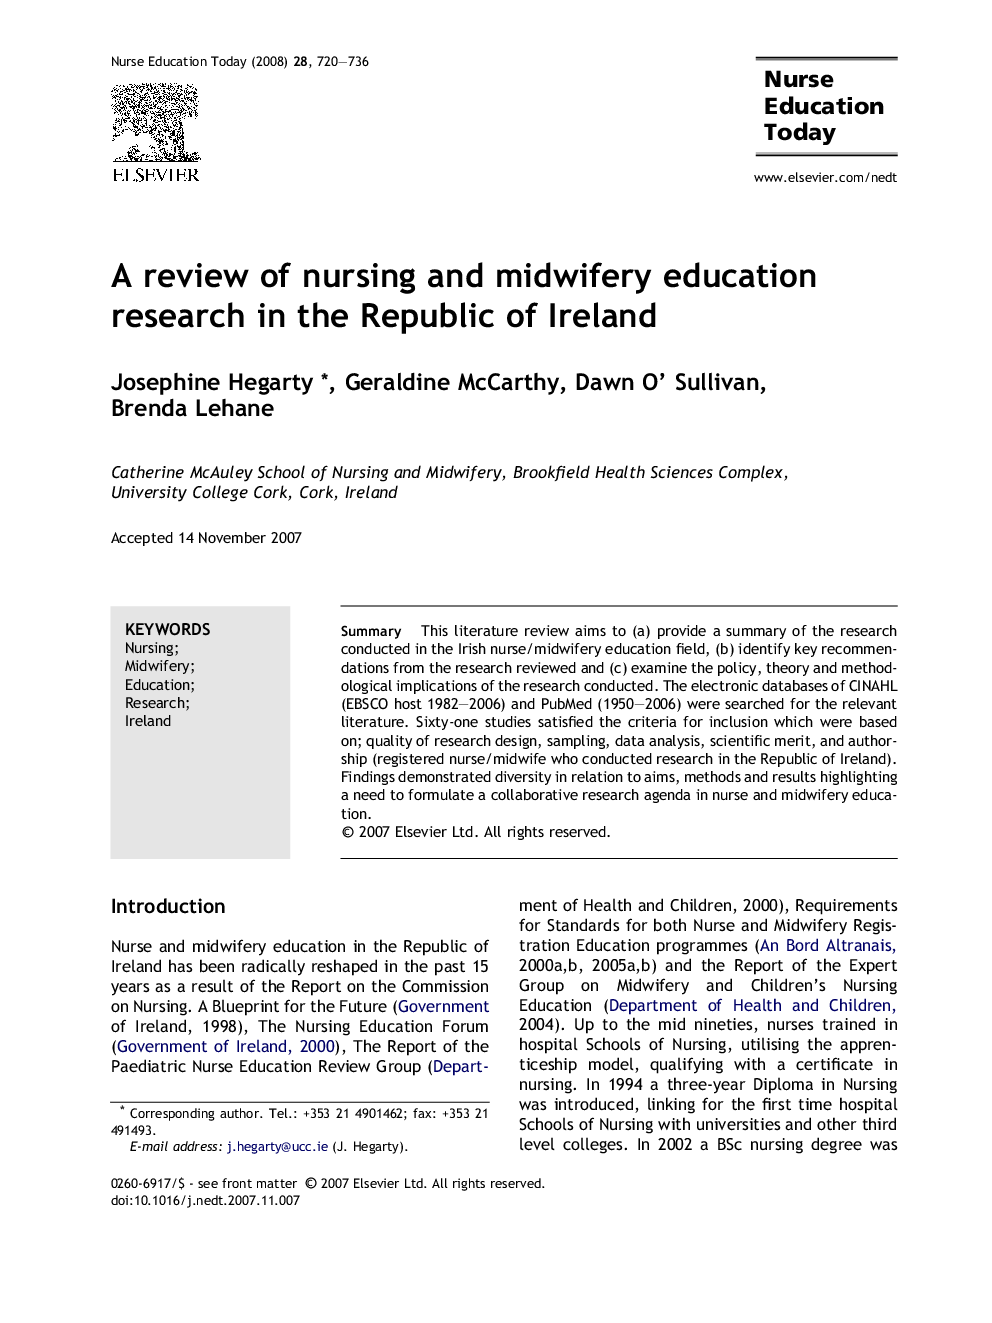 A review of nursing and midwifery education research in the Republic of Ireland